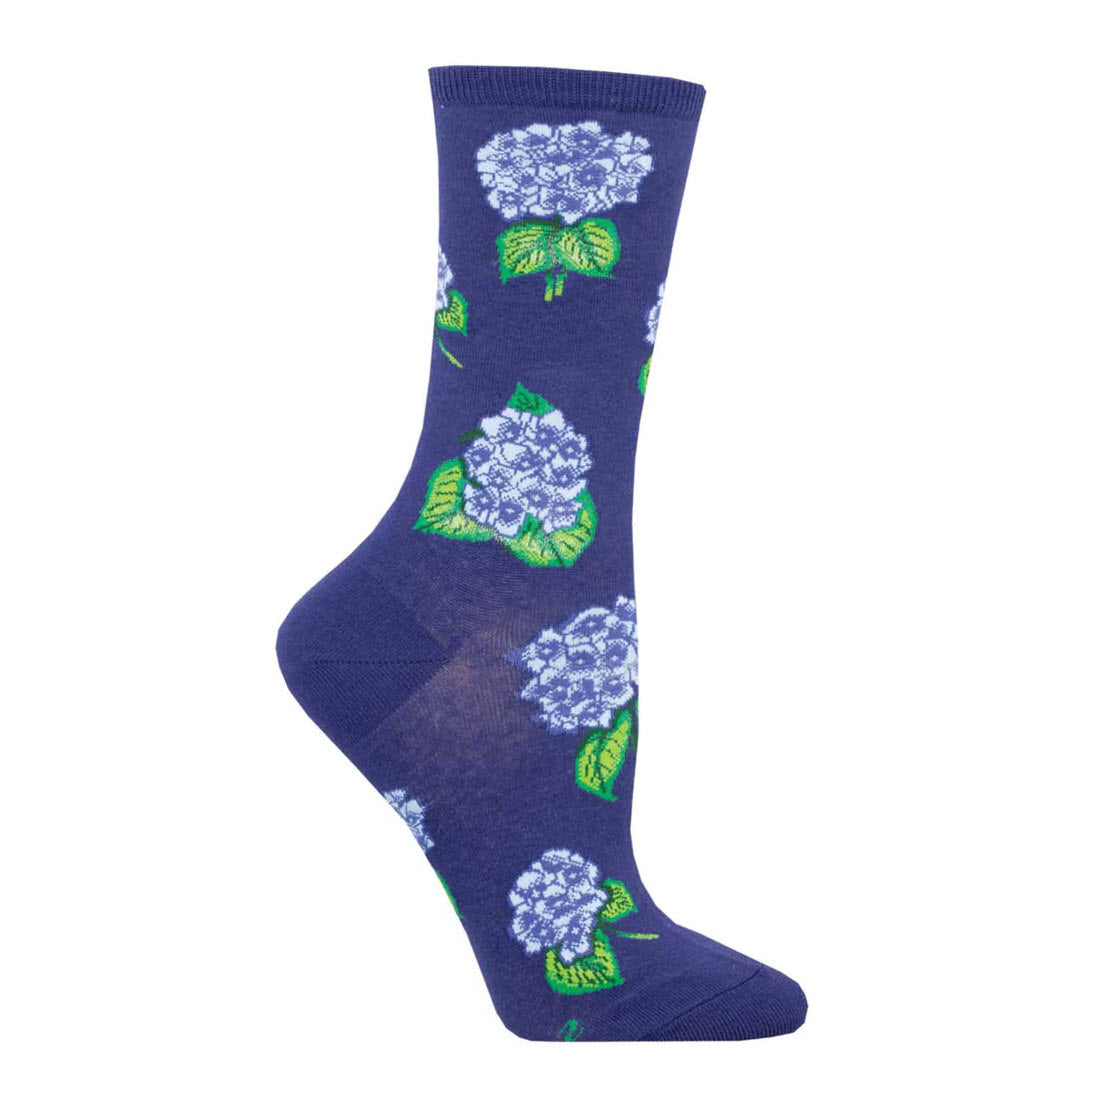 A single SOCKSMITH HYDRANGEAS CREW SOCKS NAVY - WOMENS with a pattern of green leaves and light blue hydrangea flowers, perfect for those who love picture-perfect flowers, isolated on a white background.